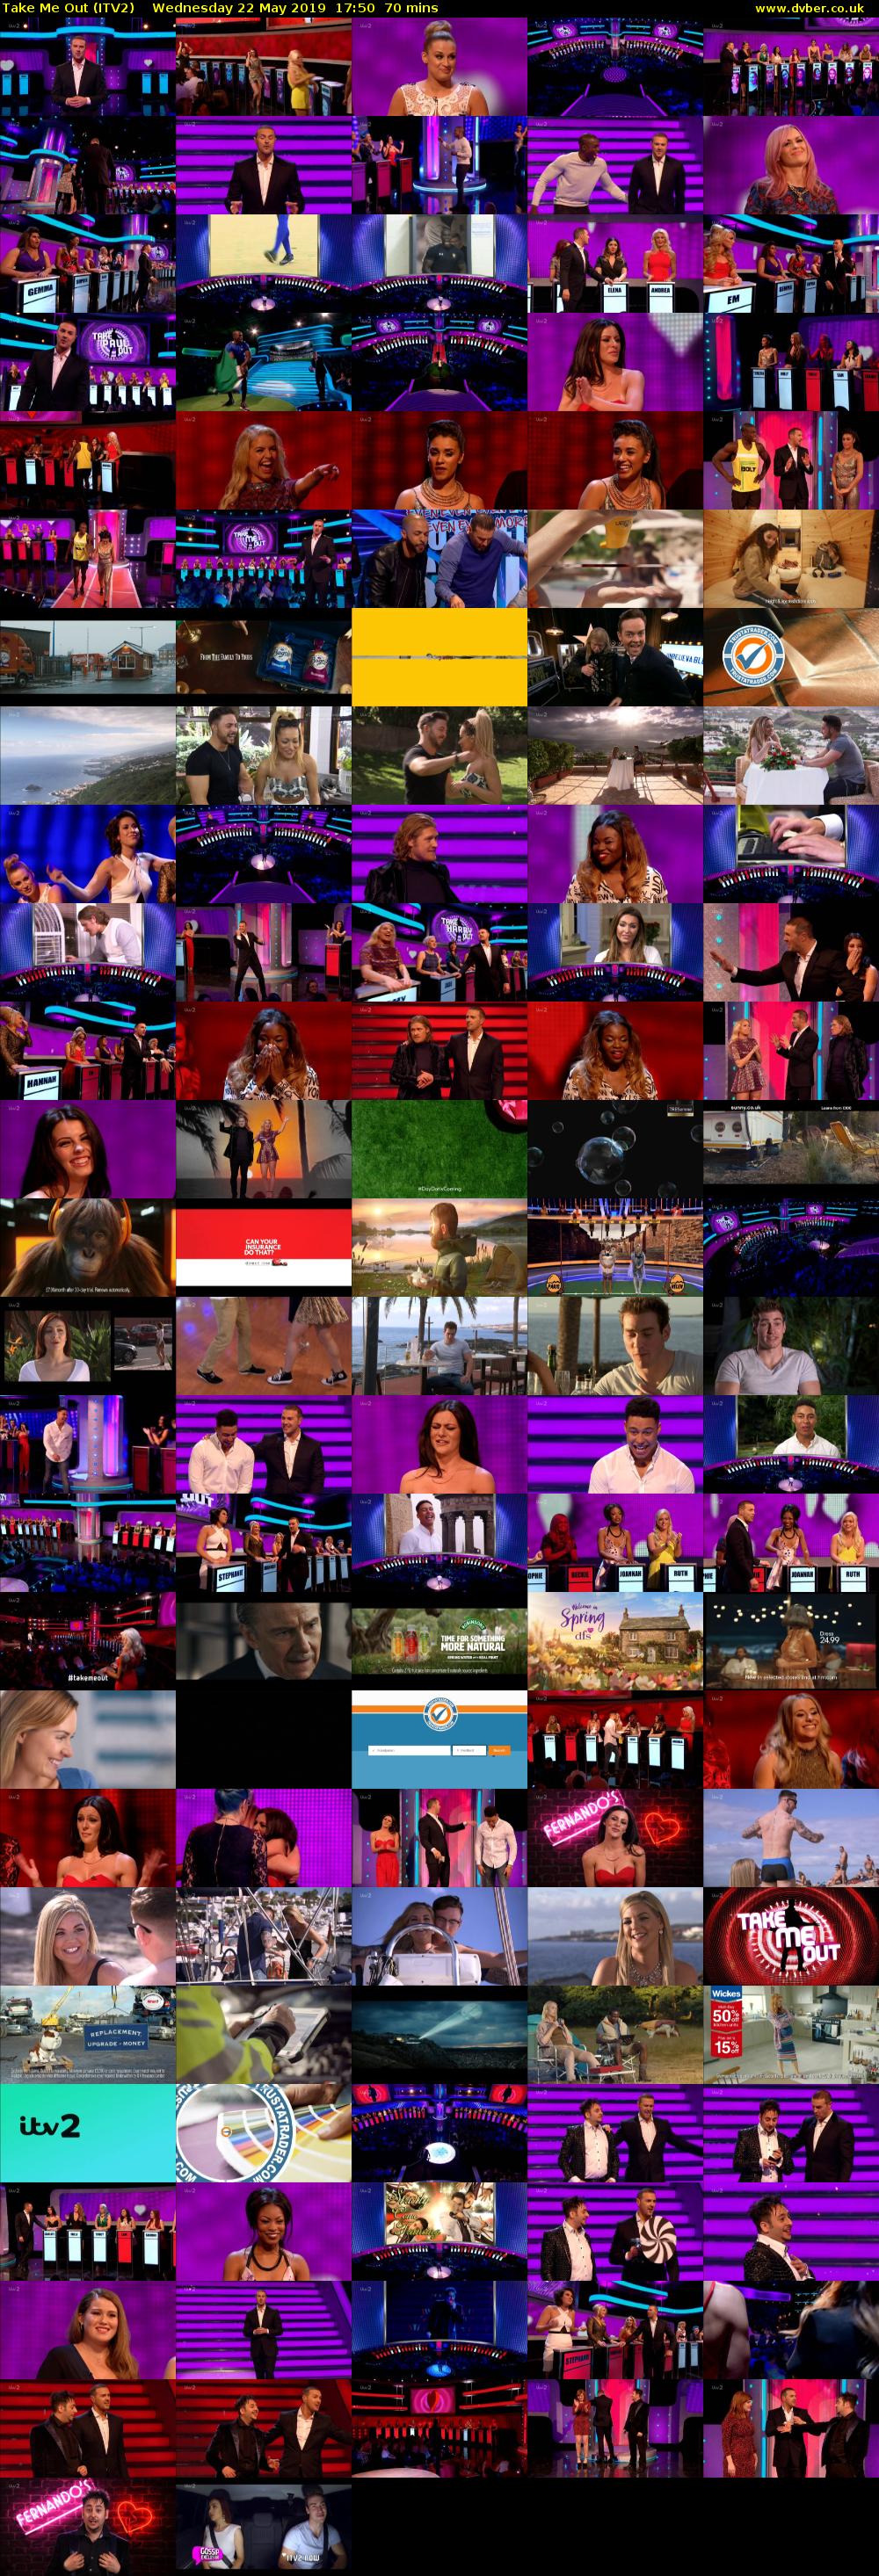 Take Me Out (ITV2) Wednesday 22 May 2019 17:50 - 19:00